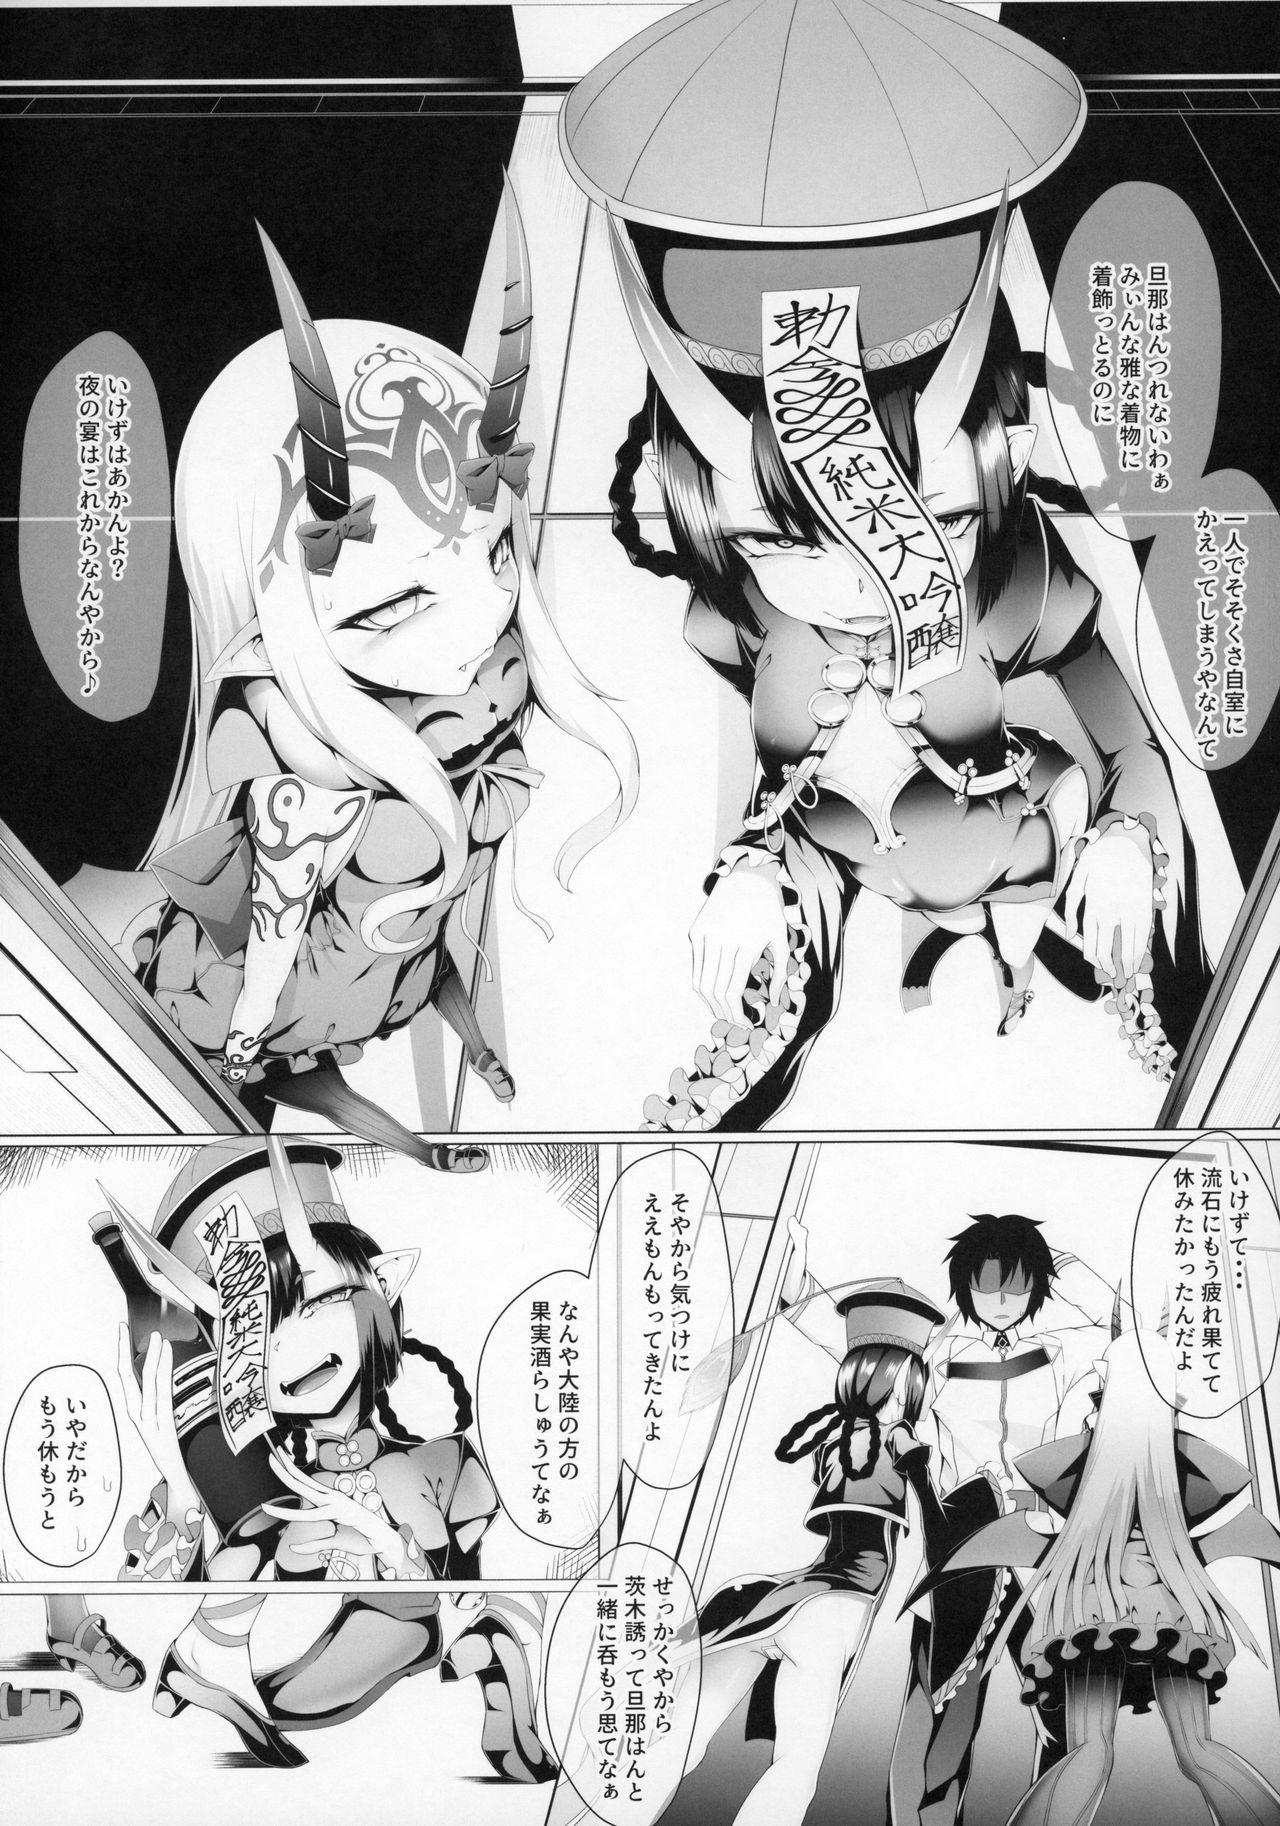 Teen Blowjob M.P. Vol. 21 - Fate grand order Animated - Page 3